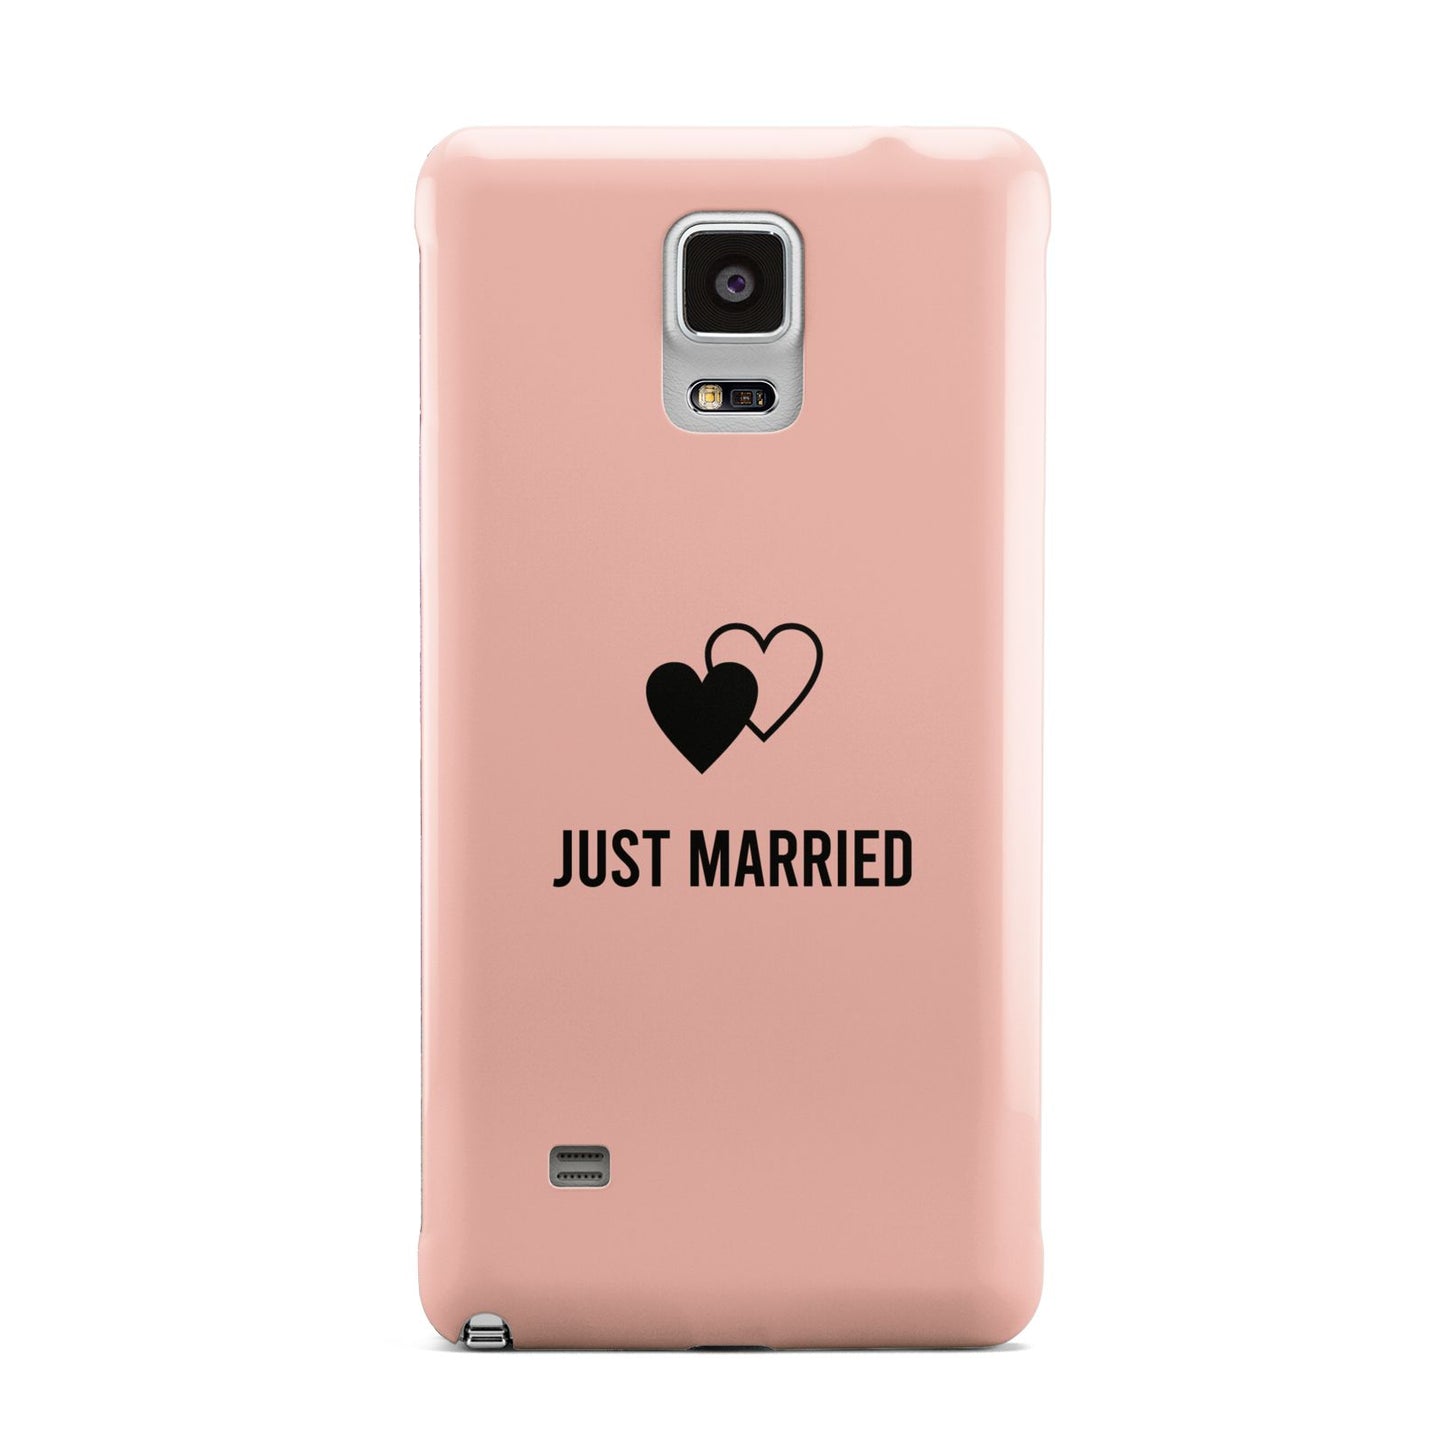 Just Married Samsung Galaxy Note 4 Case